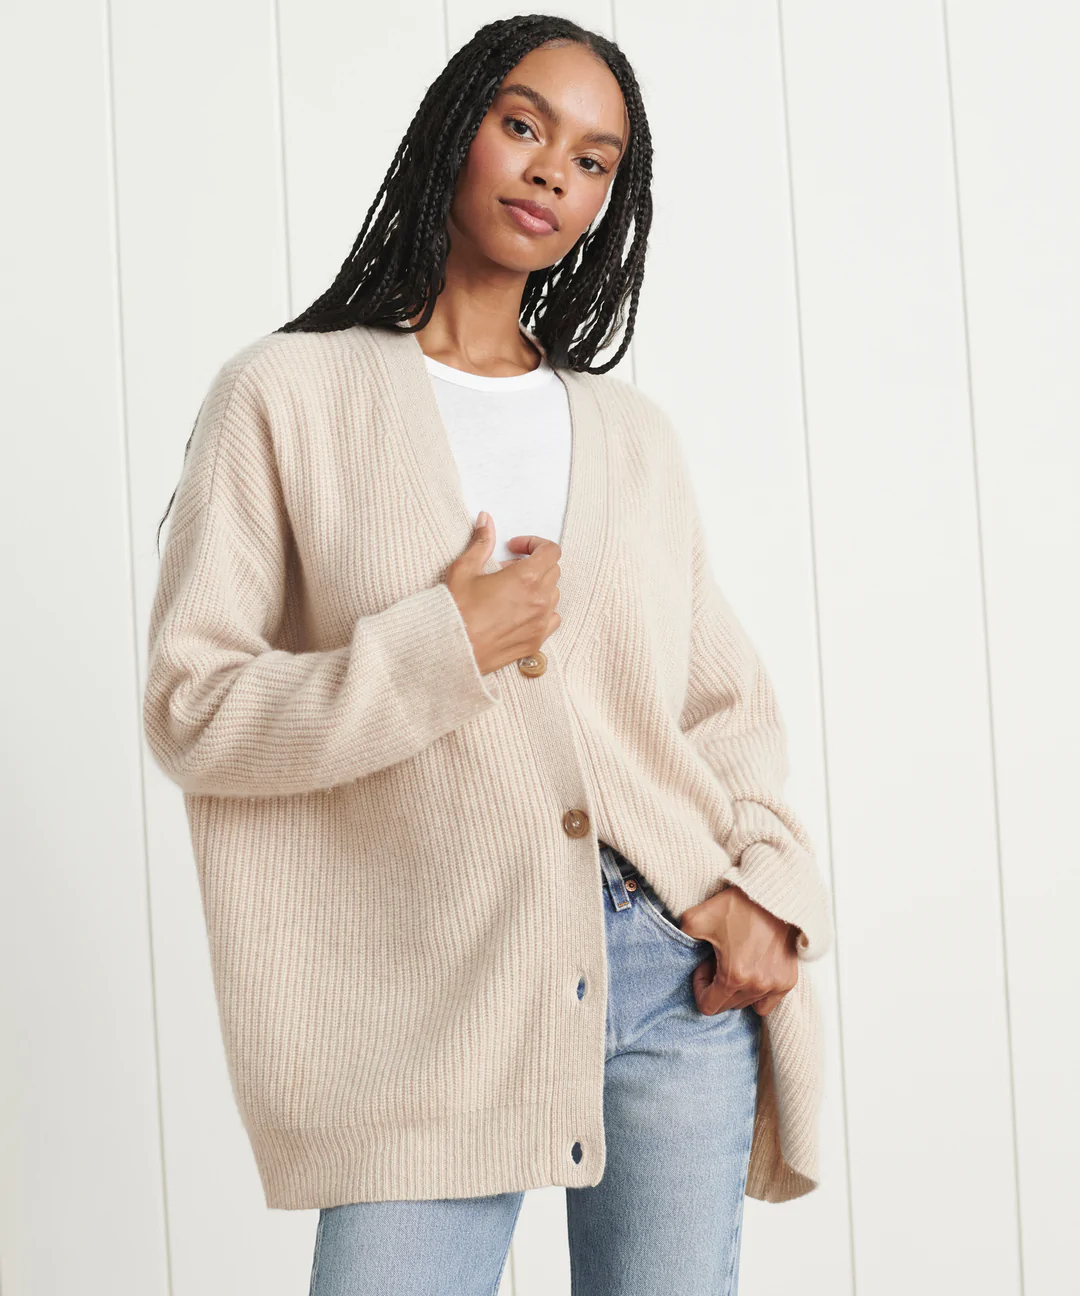 The 15 Best Cashmere Sweaters For Channeling Nancy Meyers’ Movie Energy